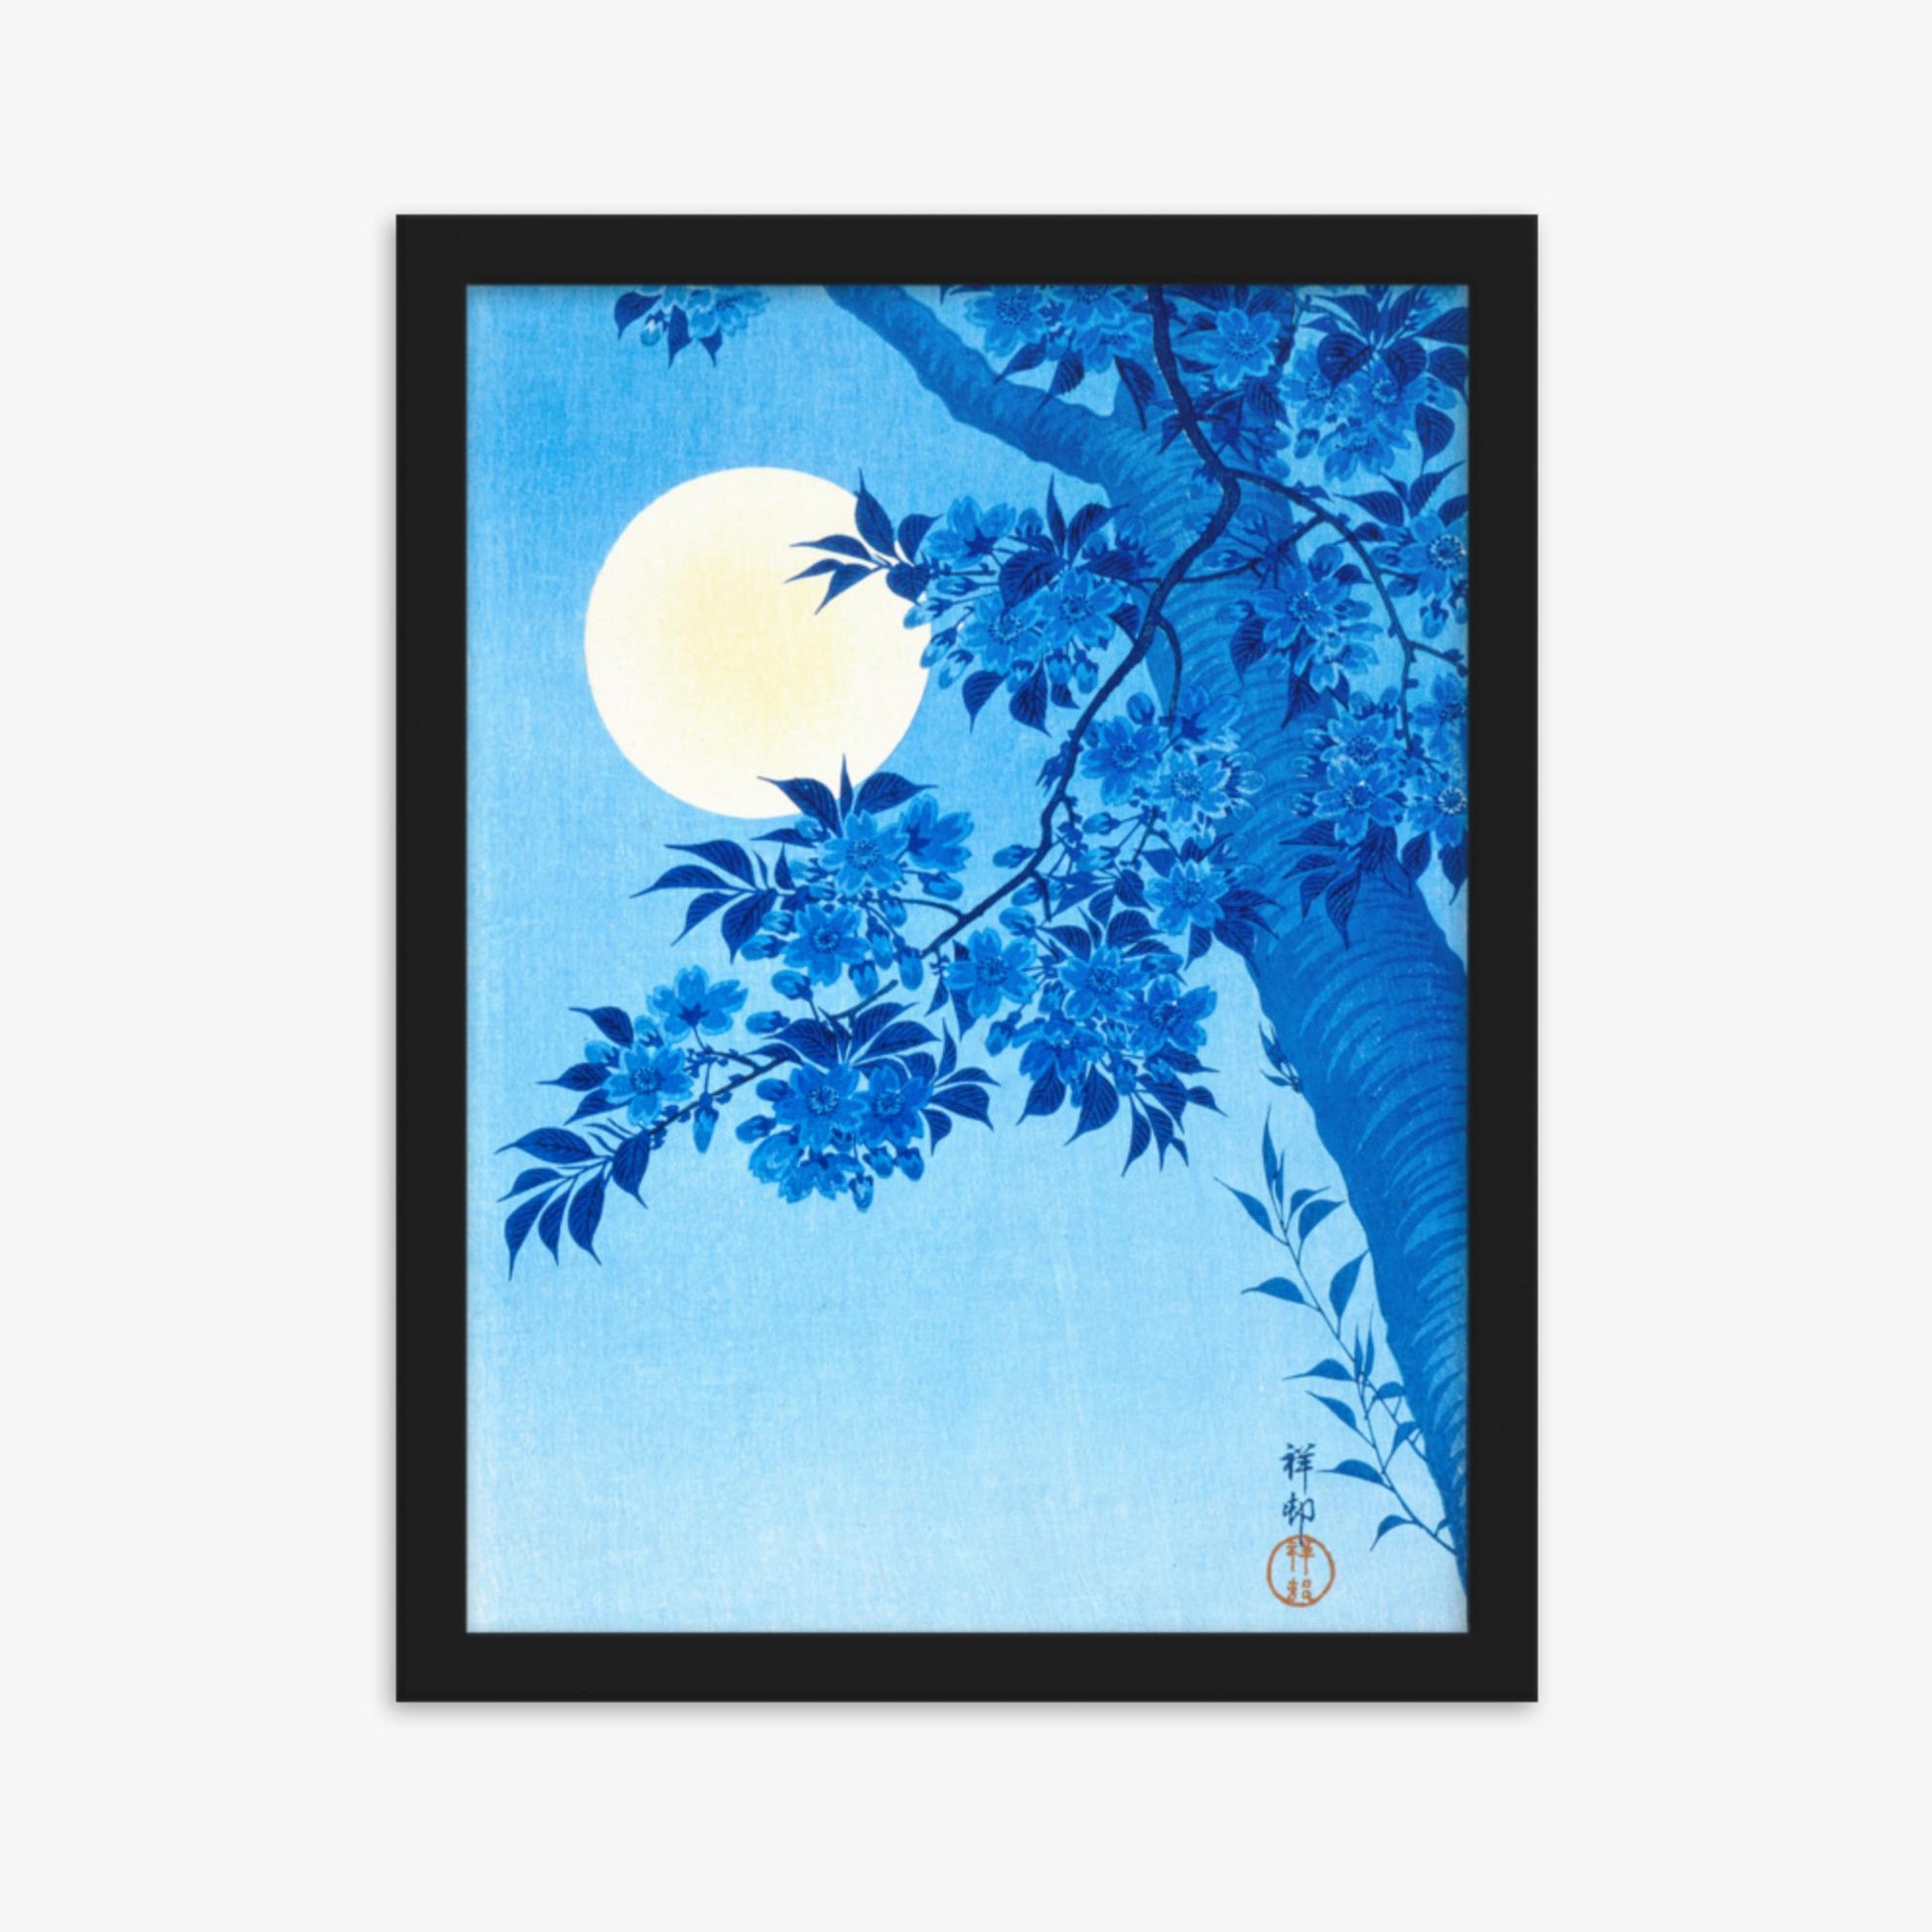 Ohara Koson - Blossoming Cherry on a Moonlit Night 30x40 cm Poster With Black Frame